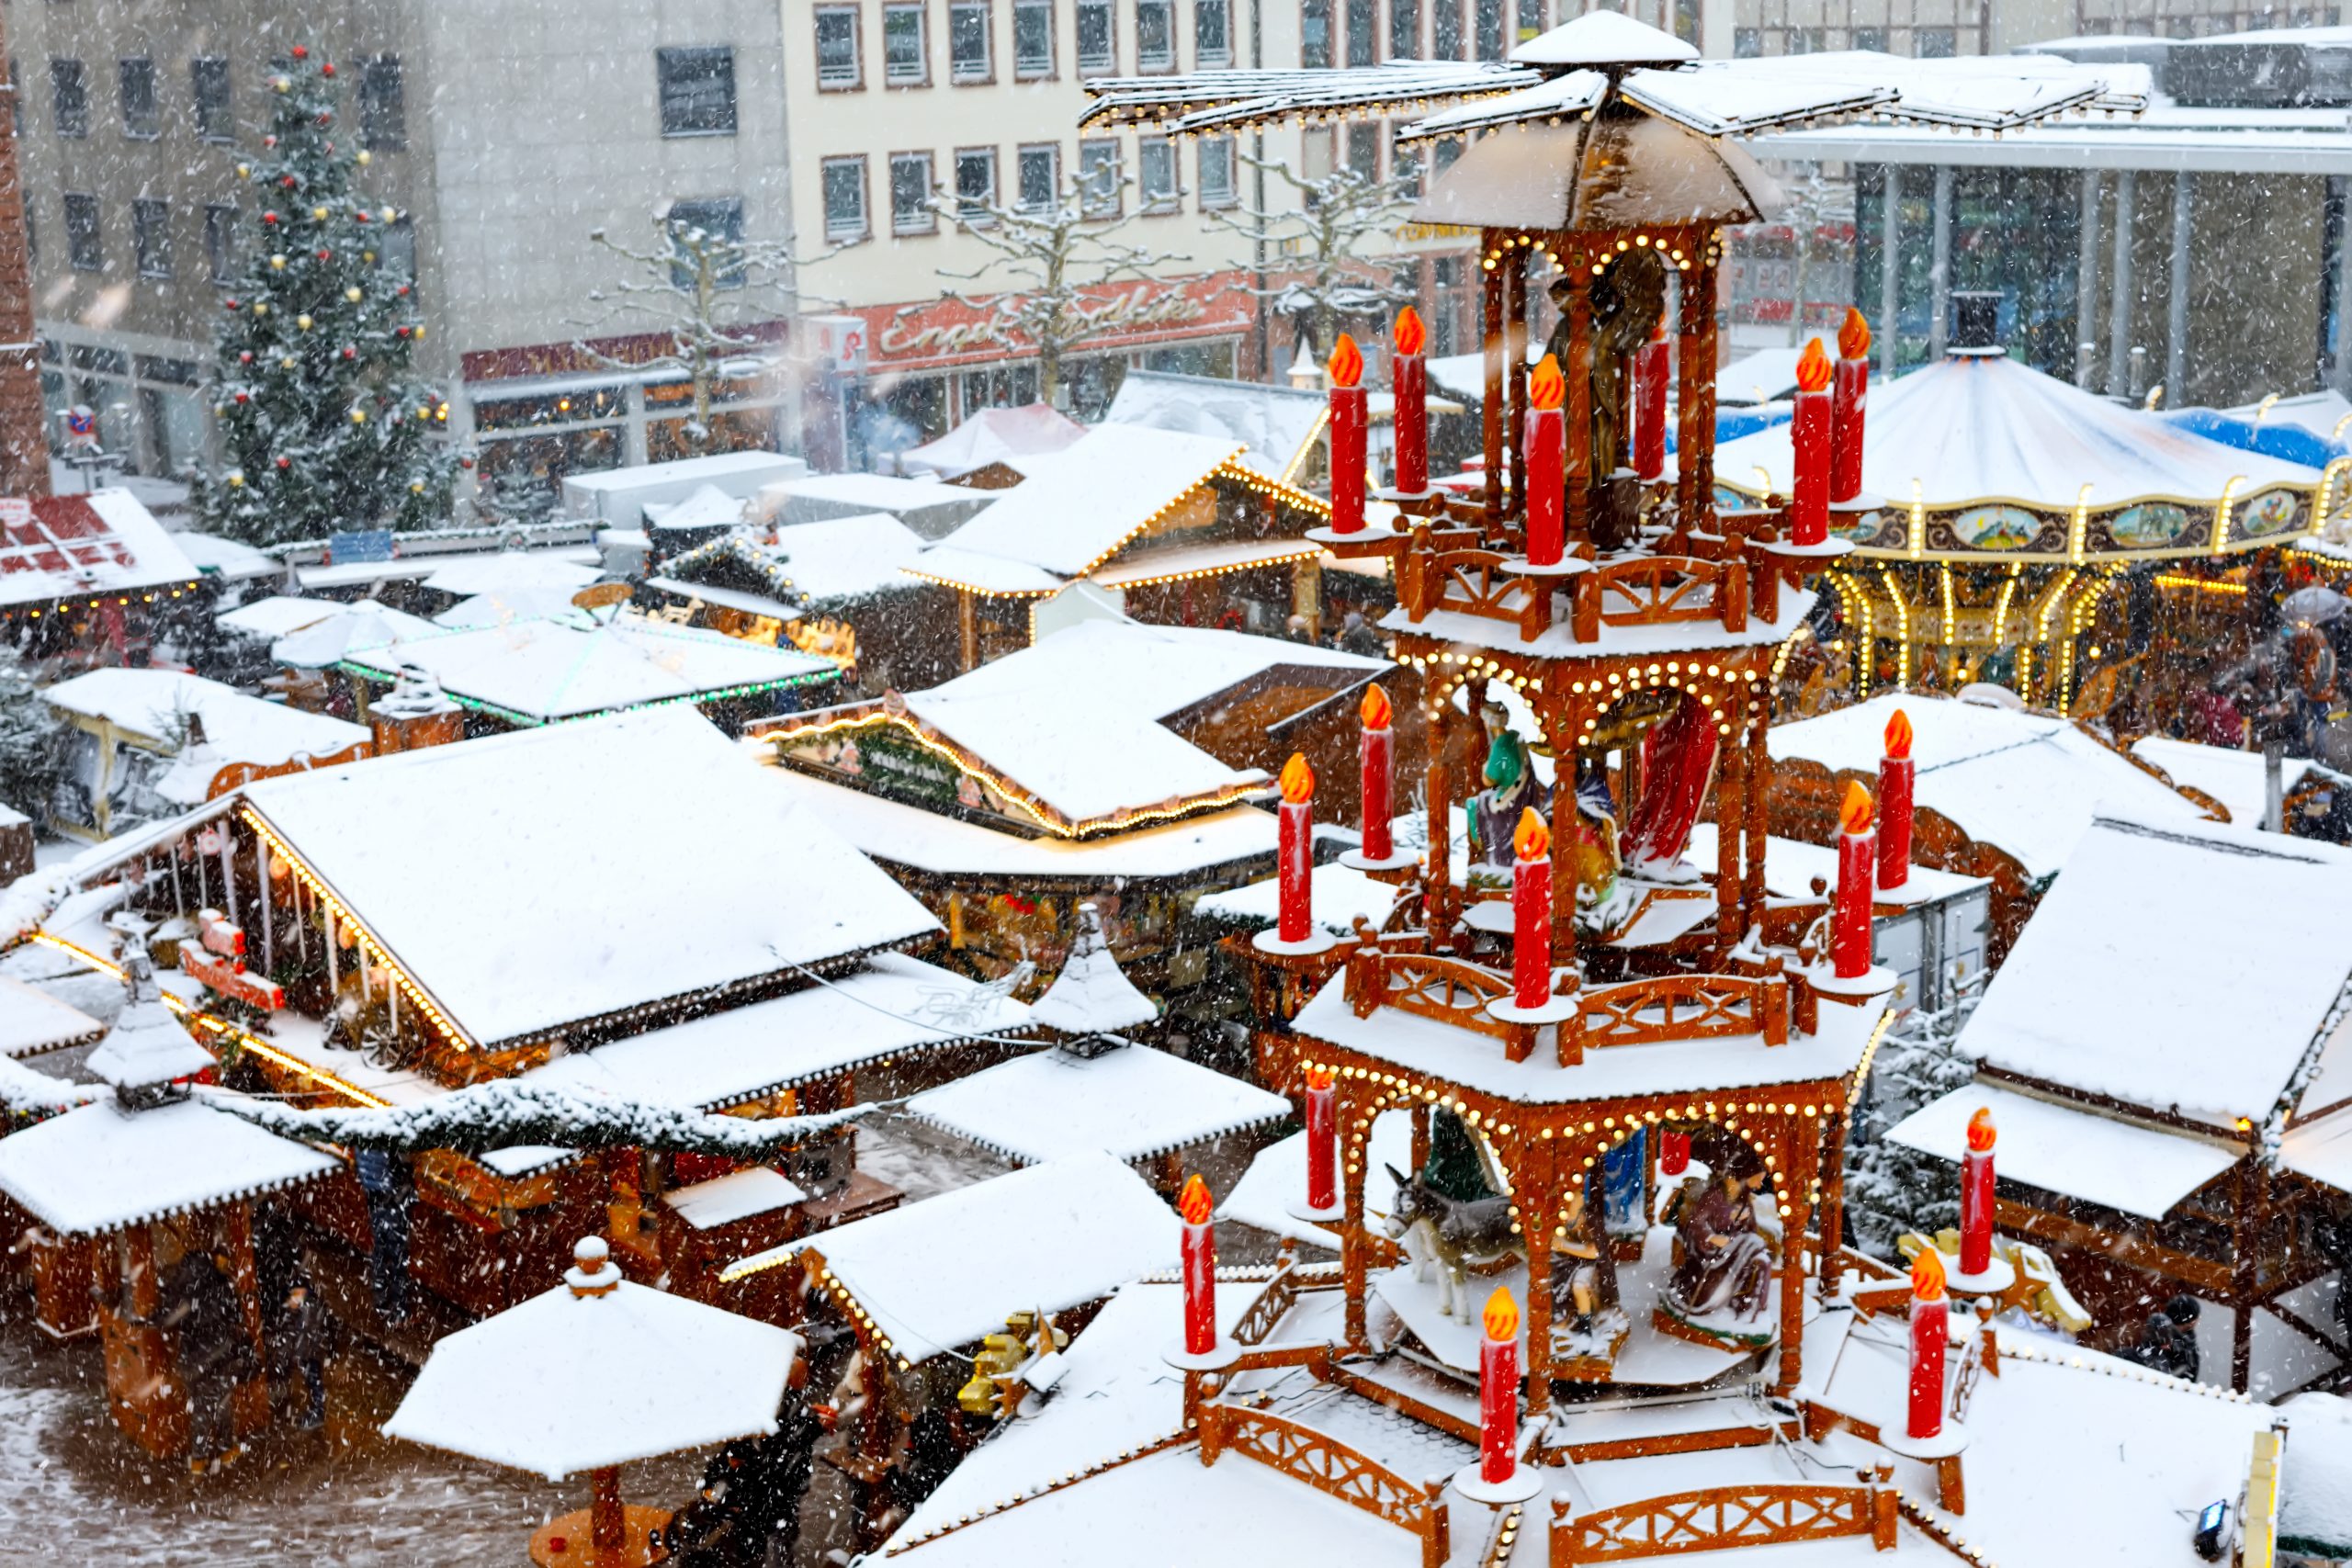 Traditional German christmas market in the historic center of Nuremberg, Germany during snow